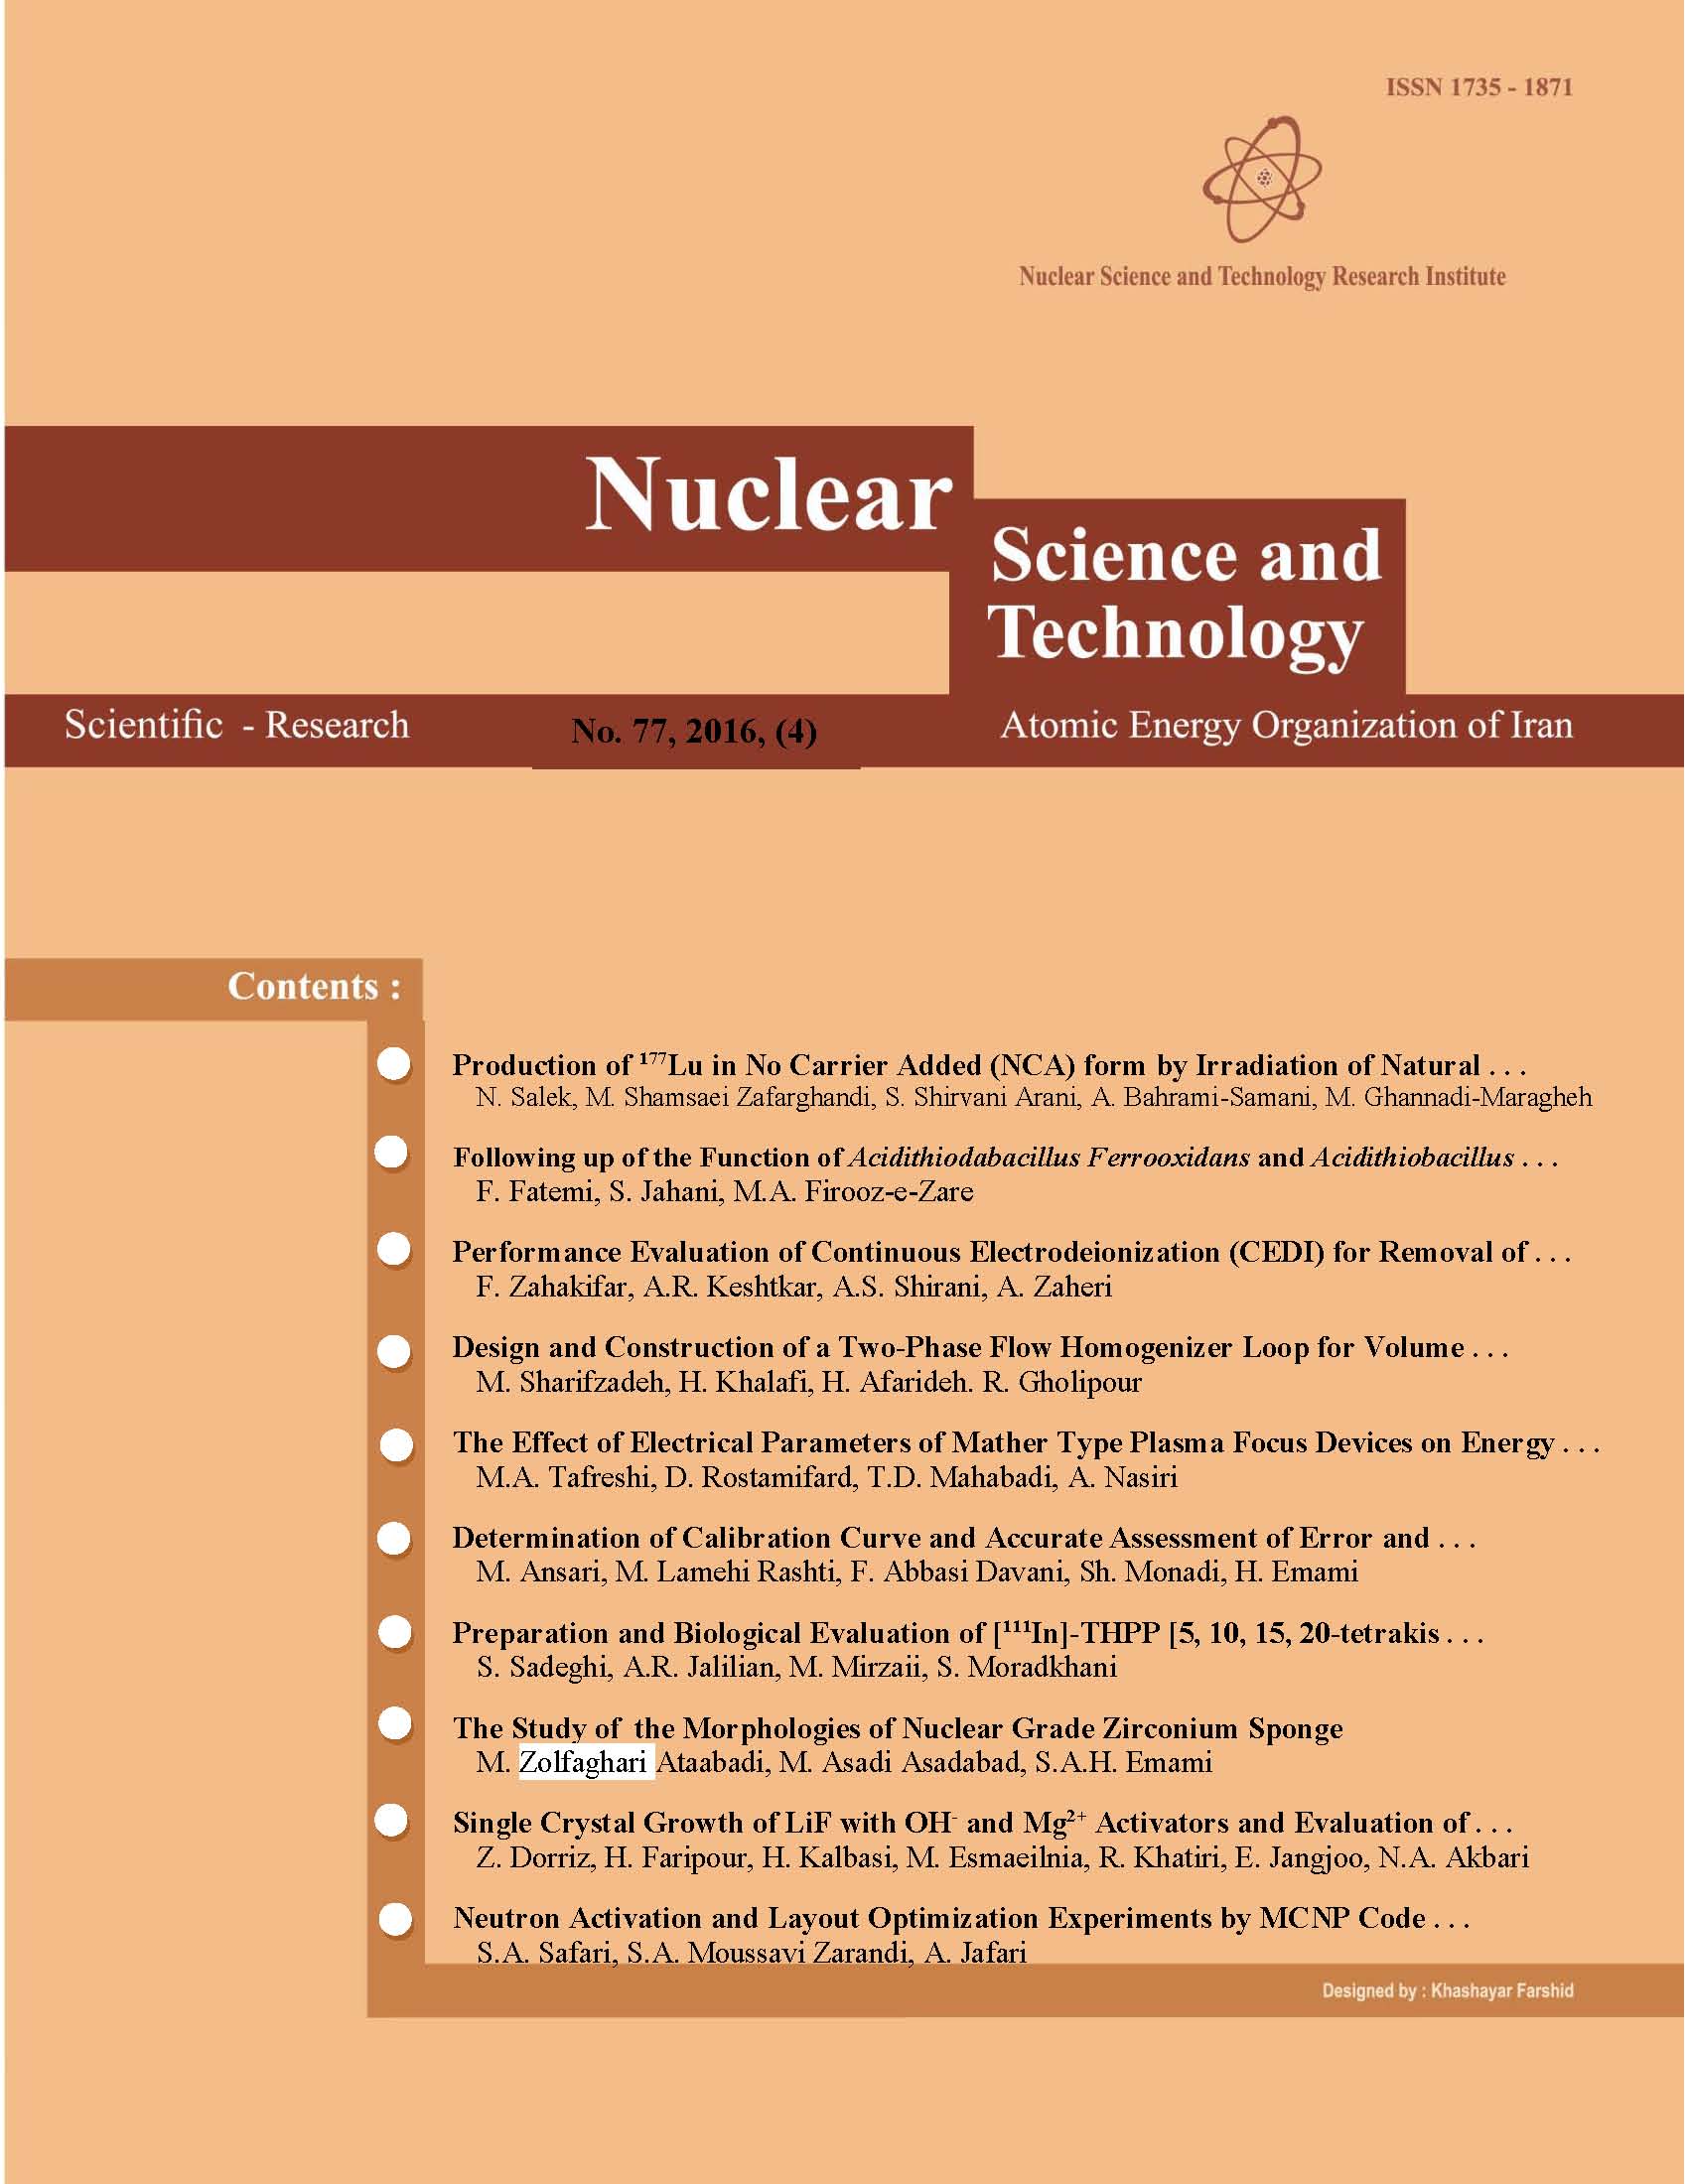 Journal of Nuclear Science and Technology (JONSAT)